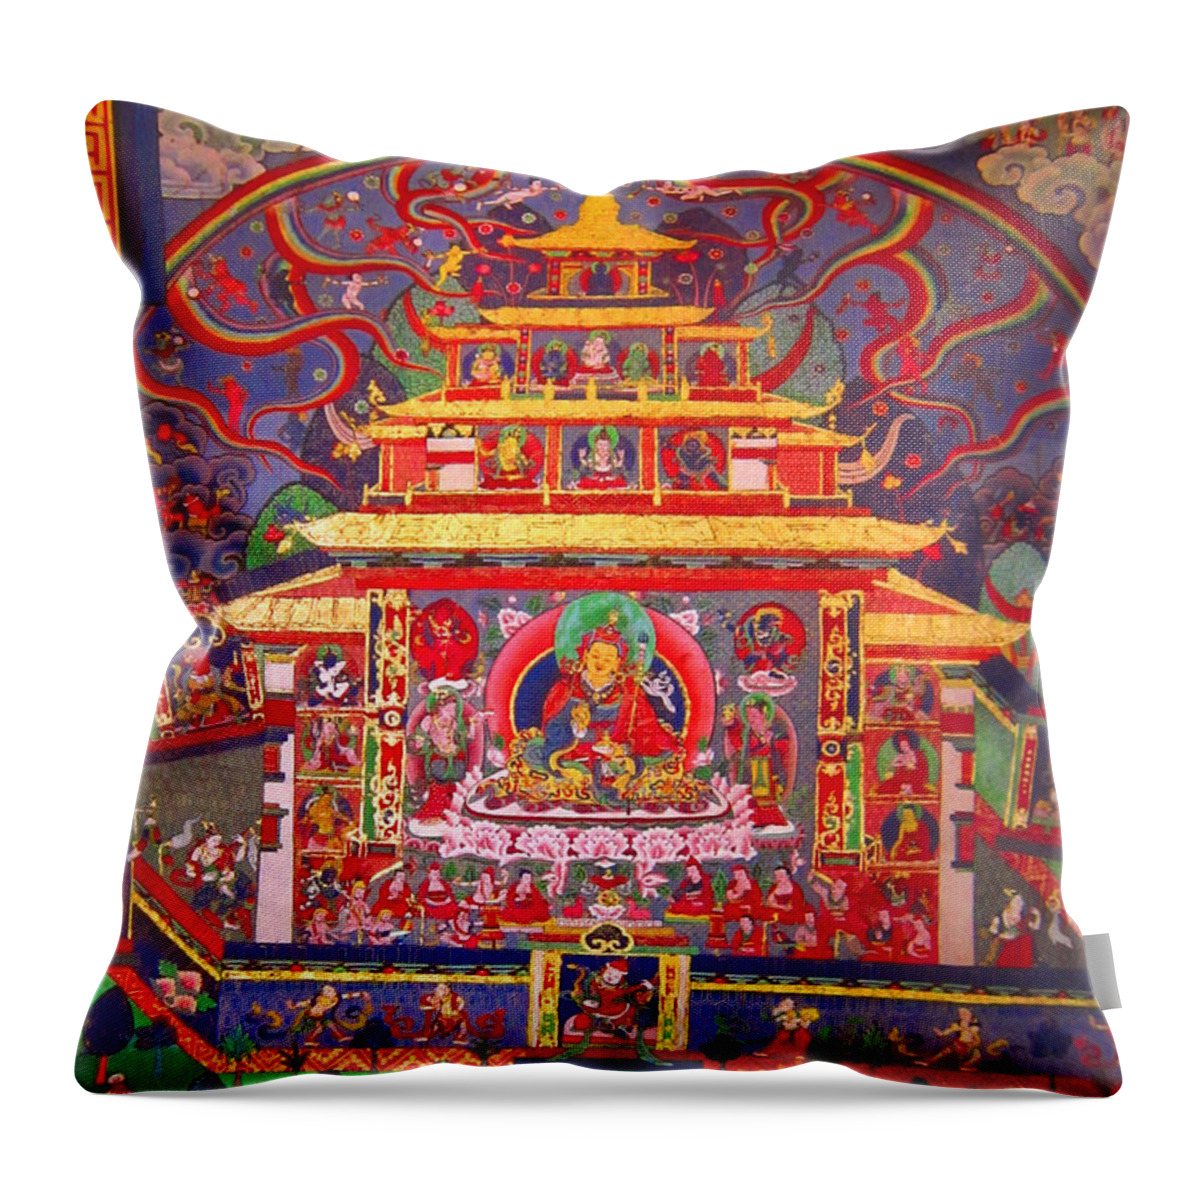 Buddhism Throw Pillow featuring the painting Buddhist Art by Steve Fields